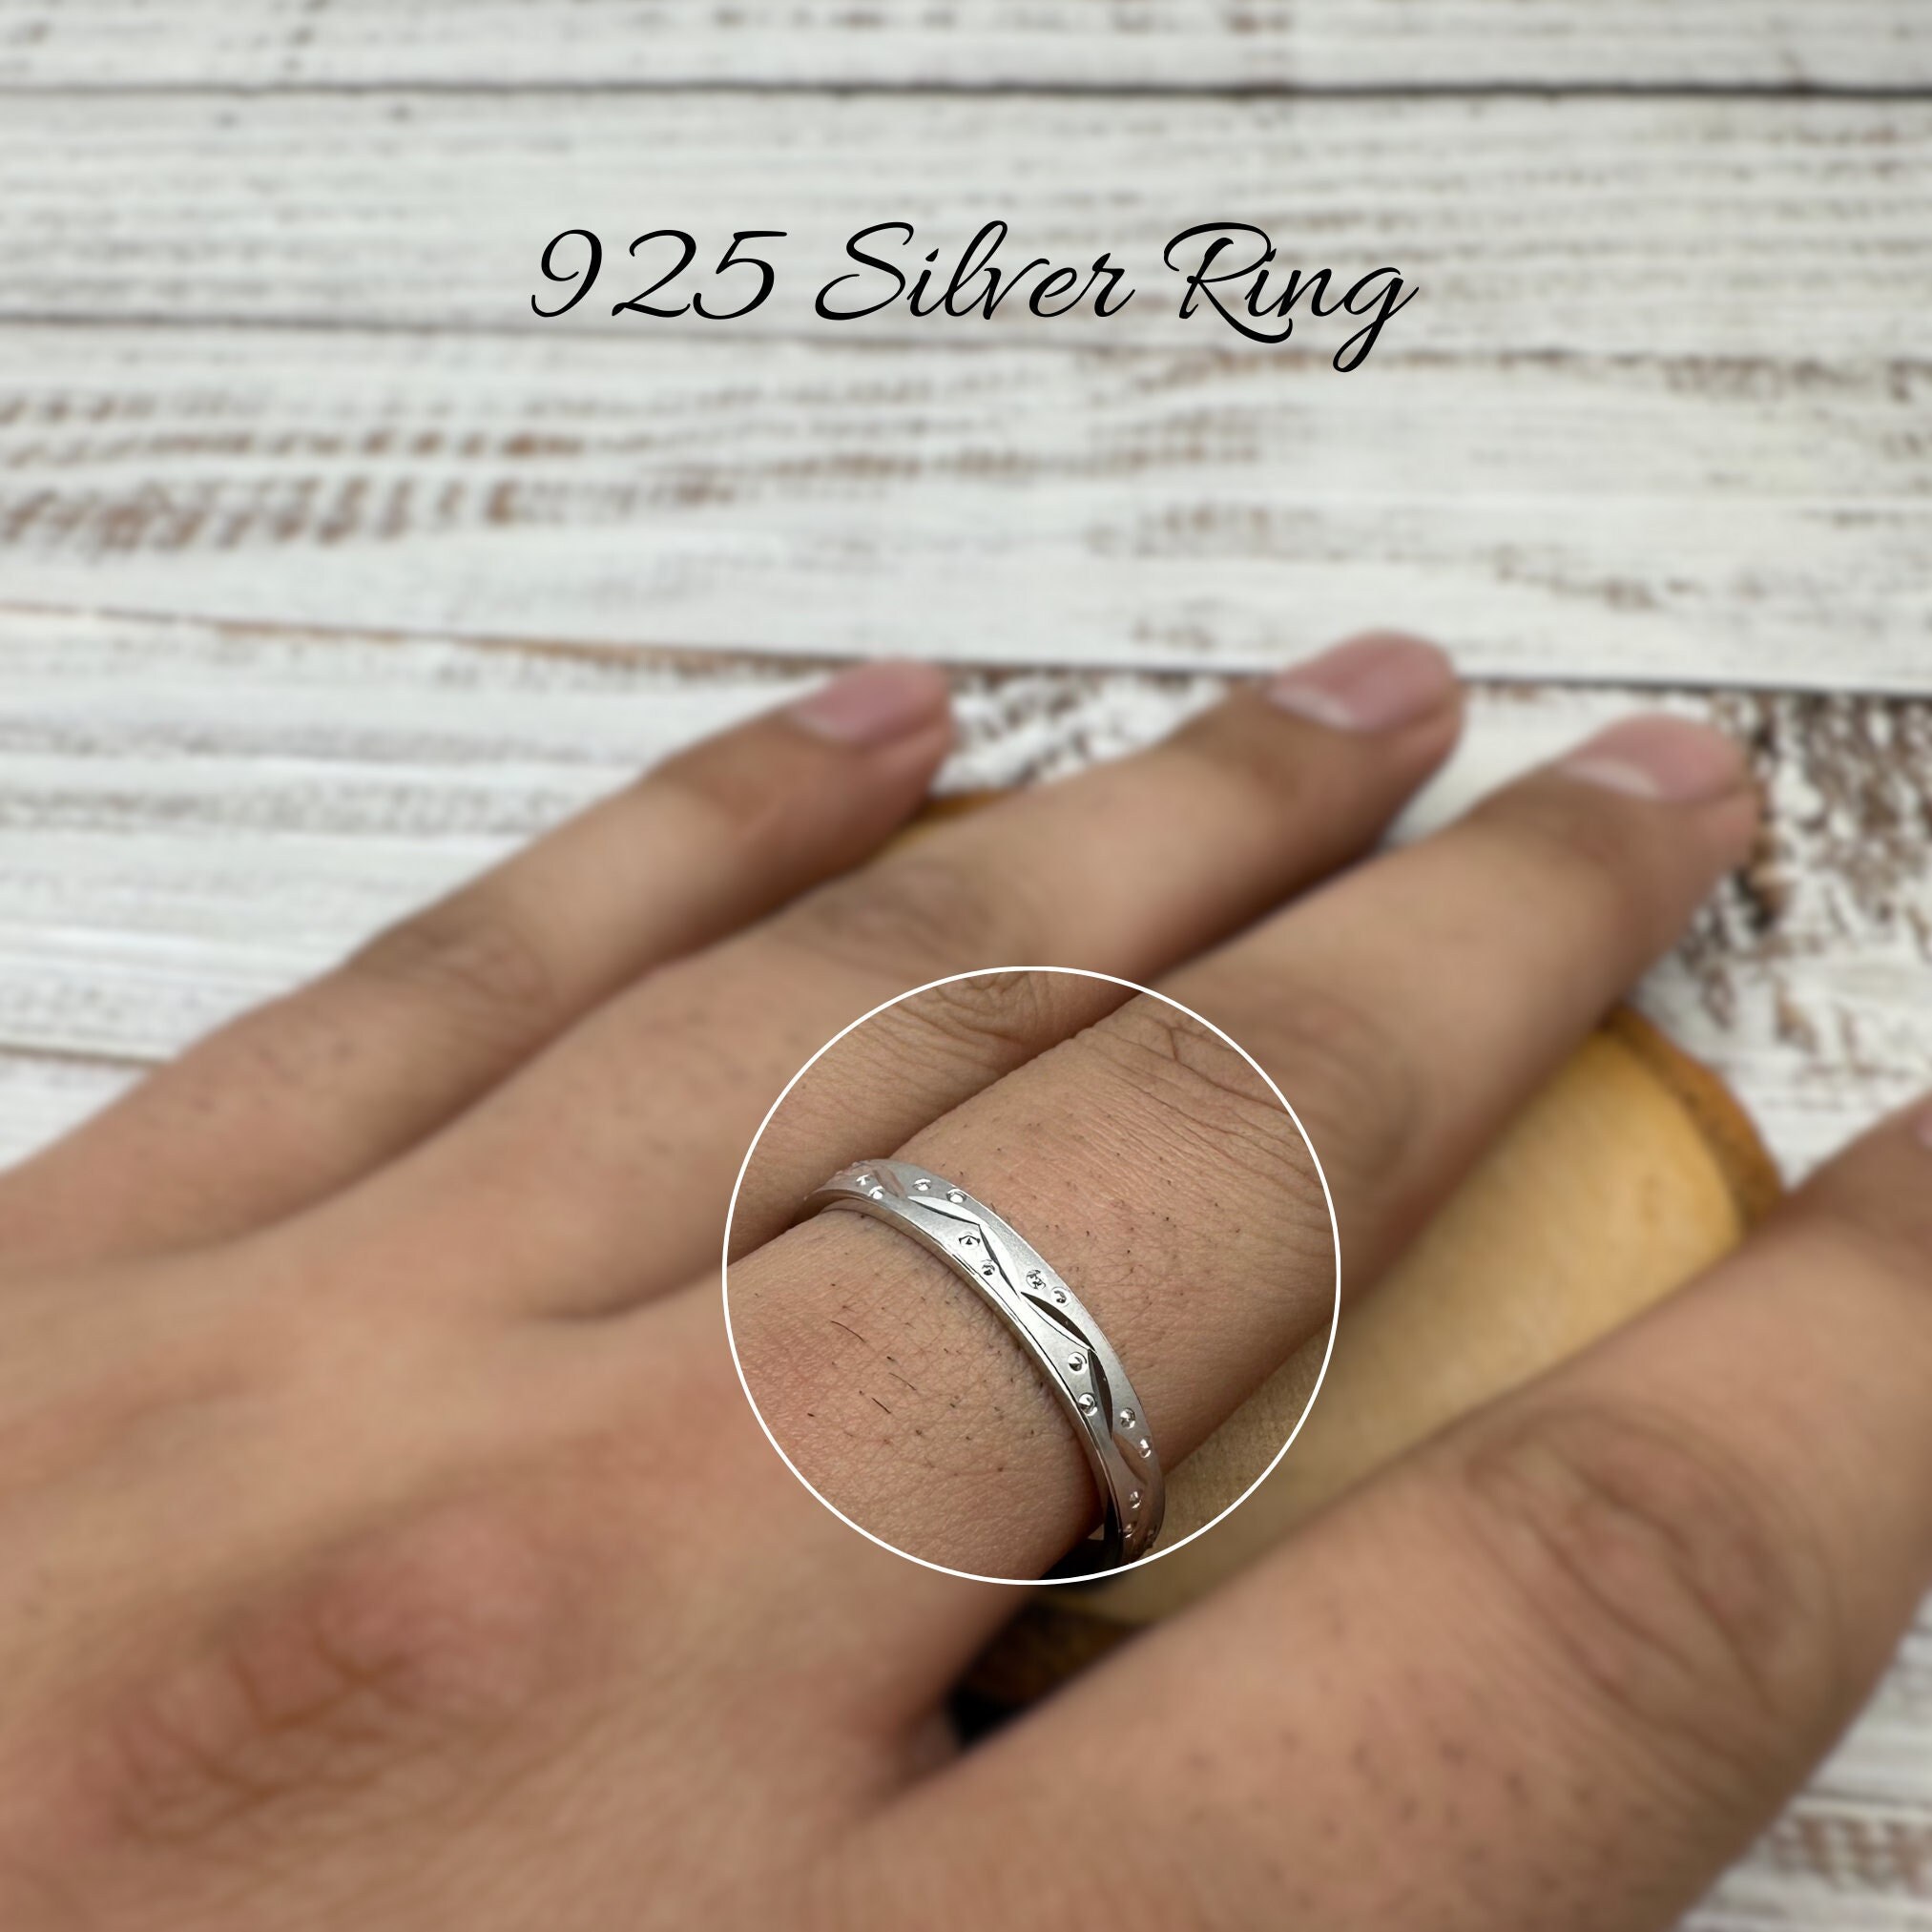 Manufacturer of 22kt couple plain star design rings | Jewelxy - 238469